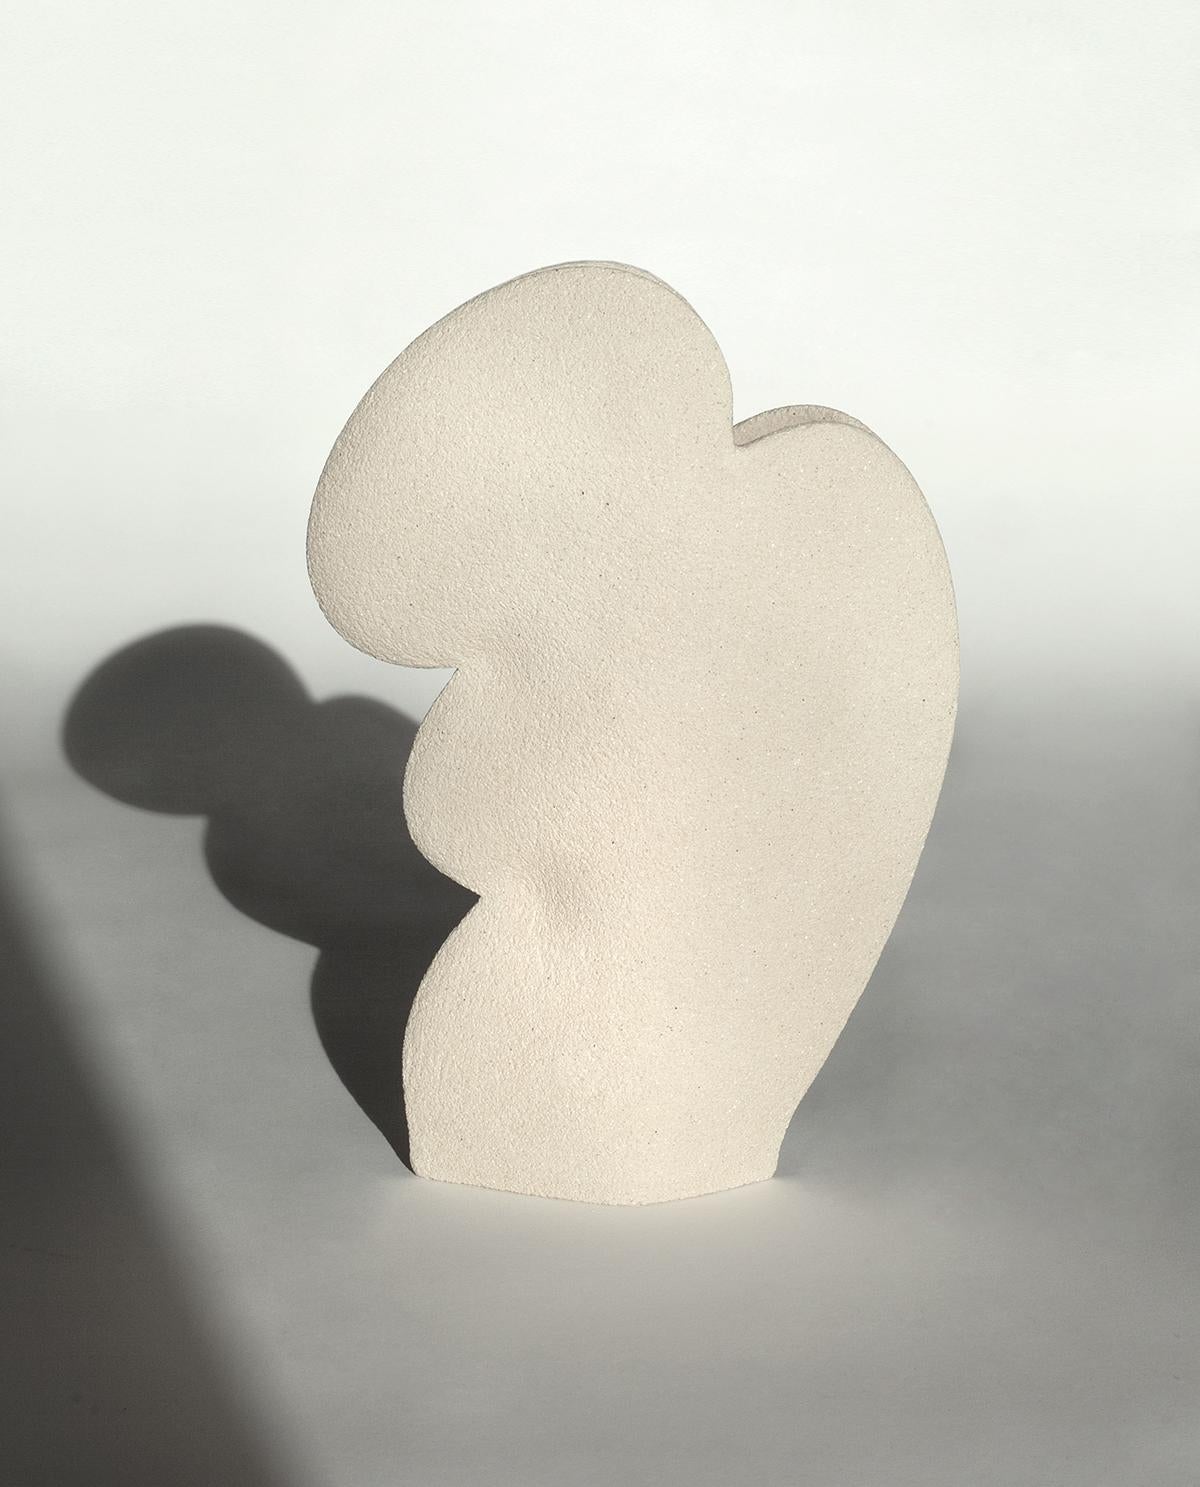 Minimalist Valentine's Set Of 2 Vases 'Woman - Woman', Hand-Crafted in France